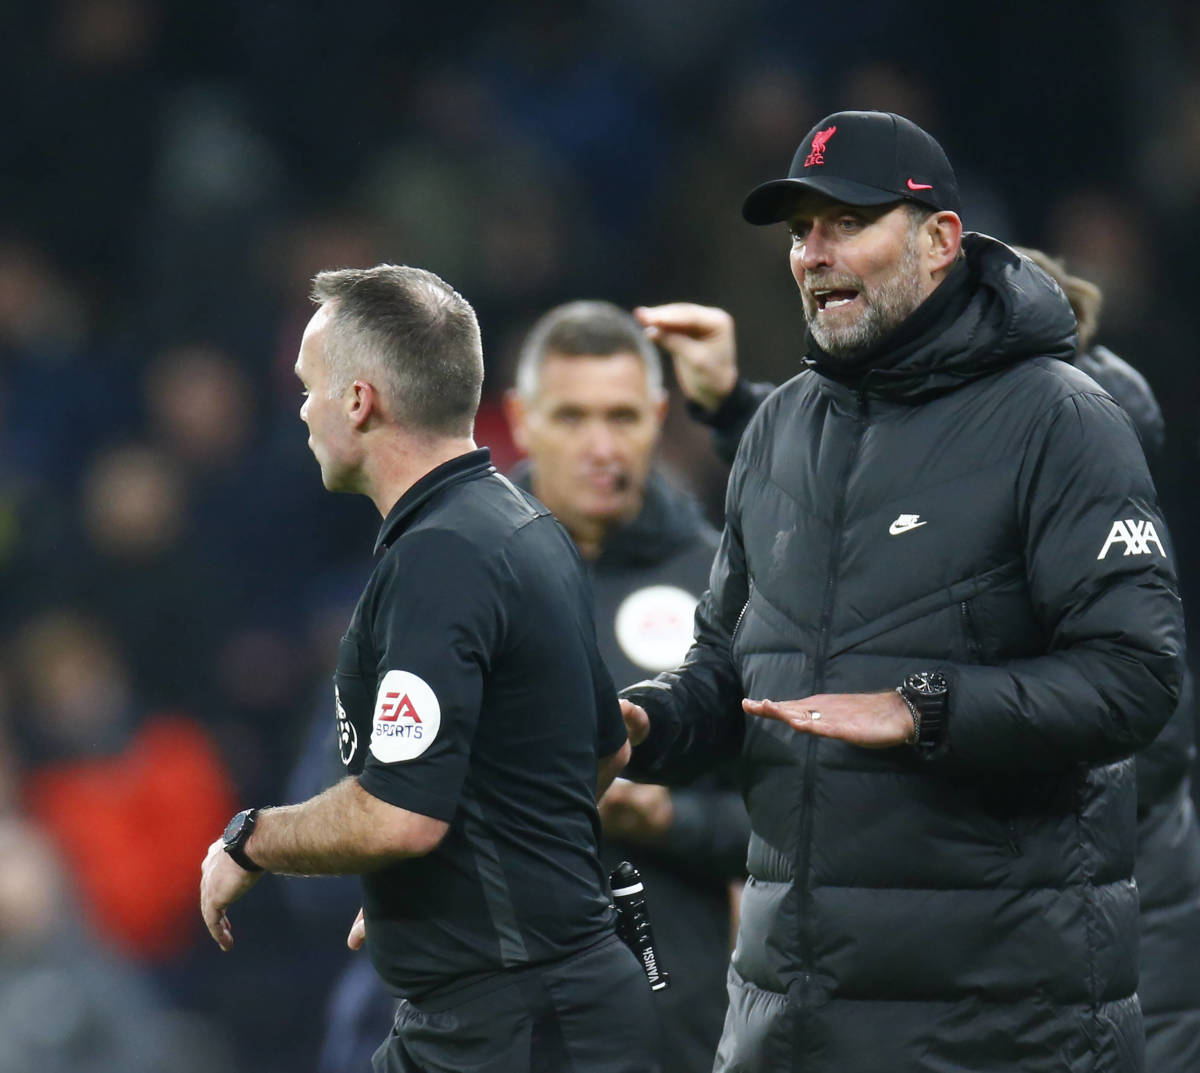 Liverpool manager Jurgen Klopp pictured (right) complaining to referee Paul Tierney after a game at Tottenham in December 2021